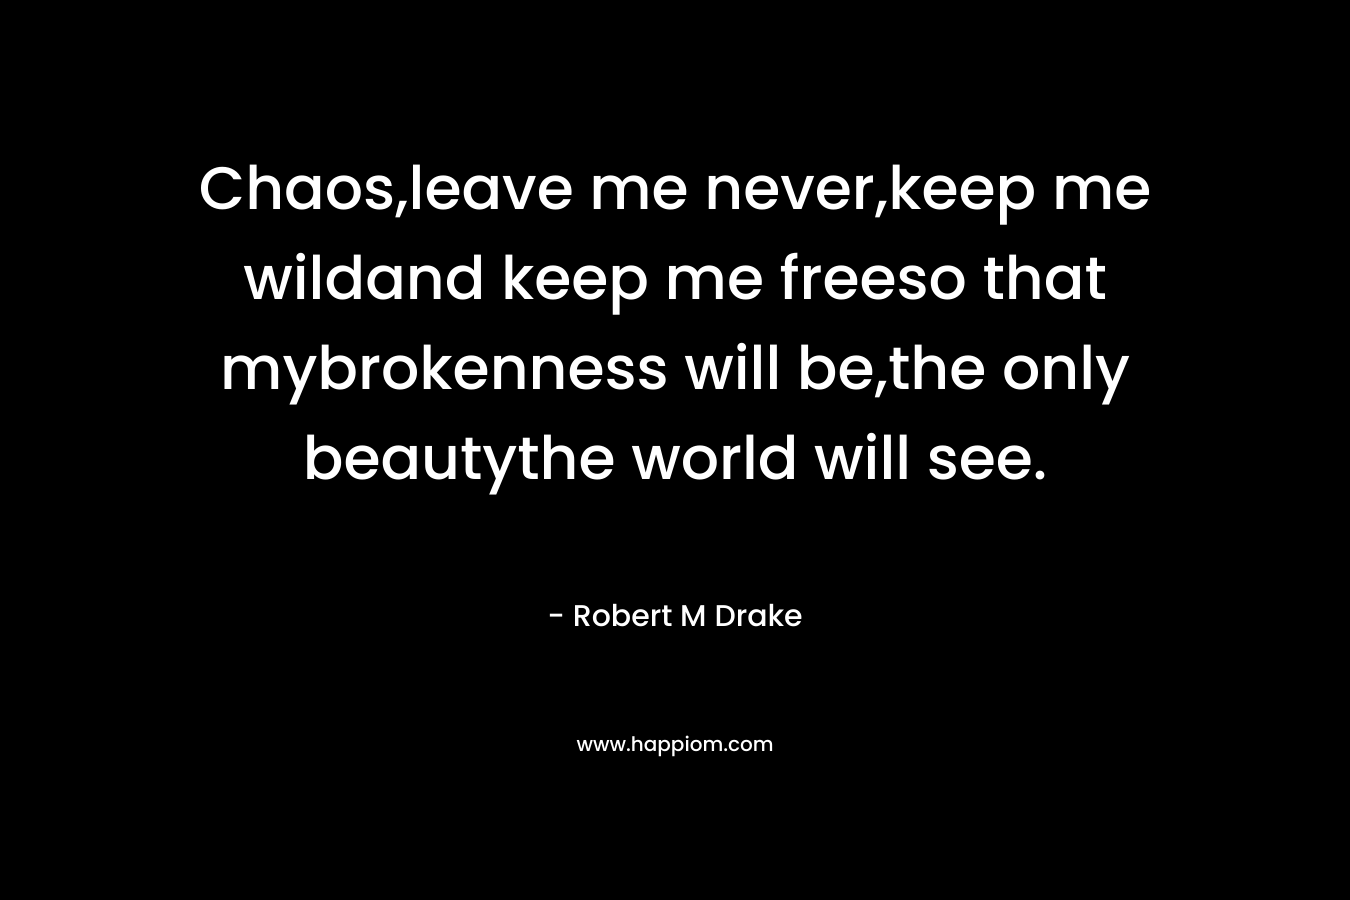 Chaos,leave me never,keep me wildand keep me freeso that mybrokenness will be,the only beautythe world will see.